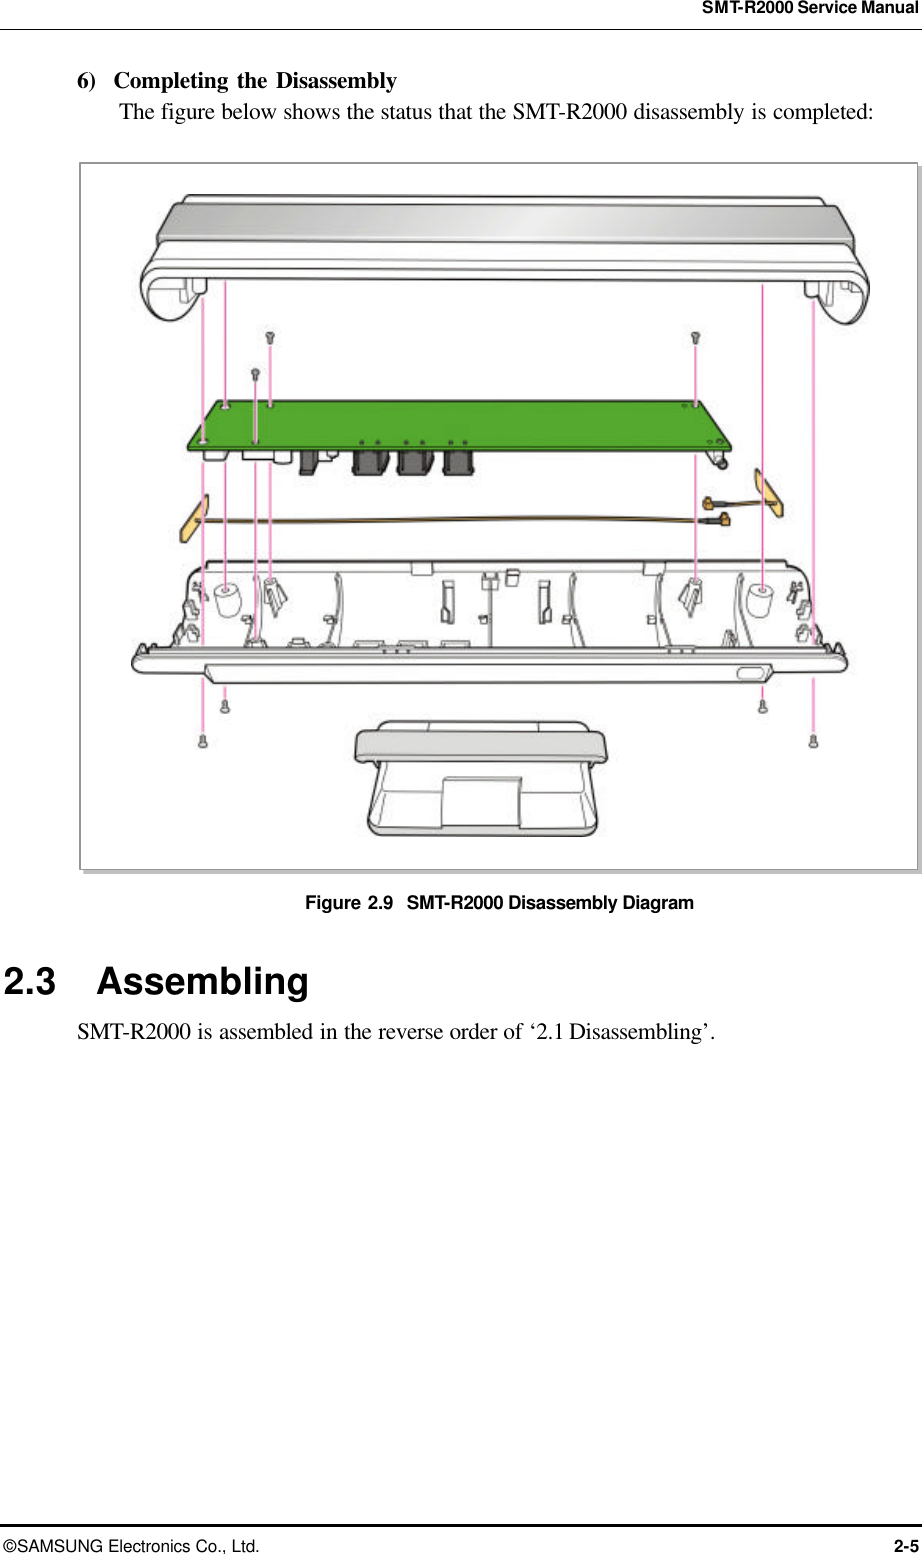  SMT-R2000 Service Manual © SAMSUNG Electronics Co., Ltd. 2-5 6)  Completing the Disassembly The figure below shows the status that the SMT-R2000 disassembly is completed:  Figure 2.9  SMT-R2000 Disassembly Diagram  2.3 Assembling SMT-R2000 is assembled in the reverse order of ‘2.1 Disassembling’.   